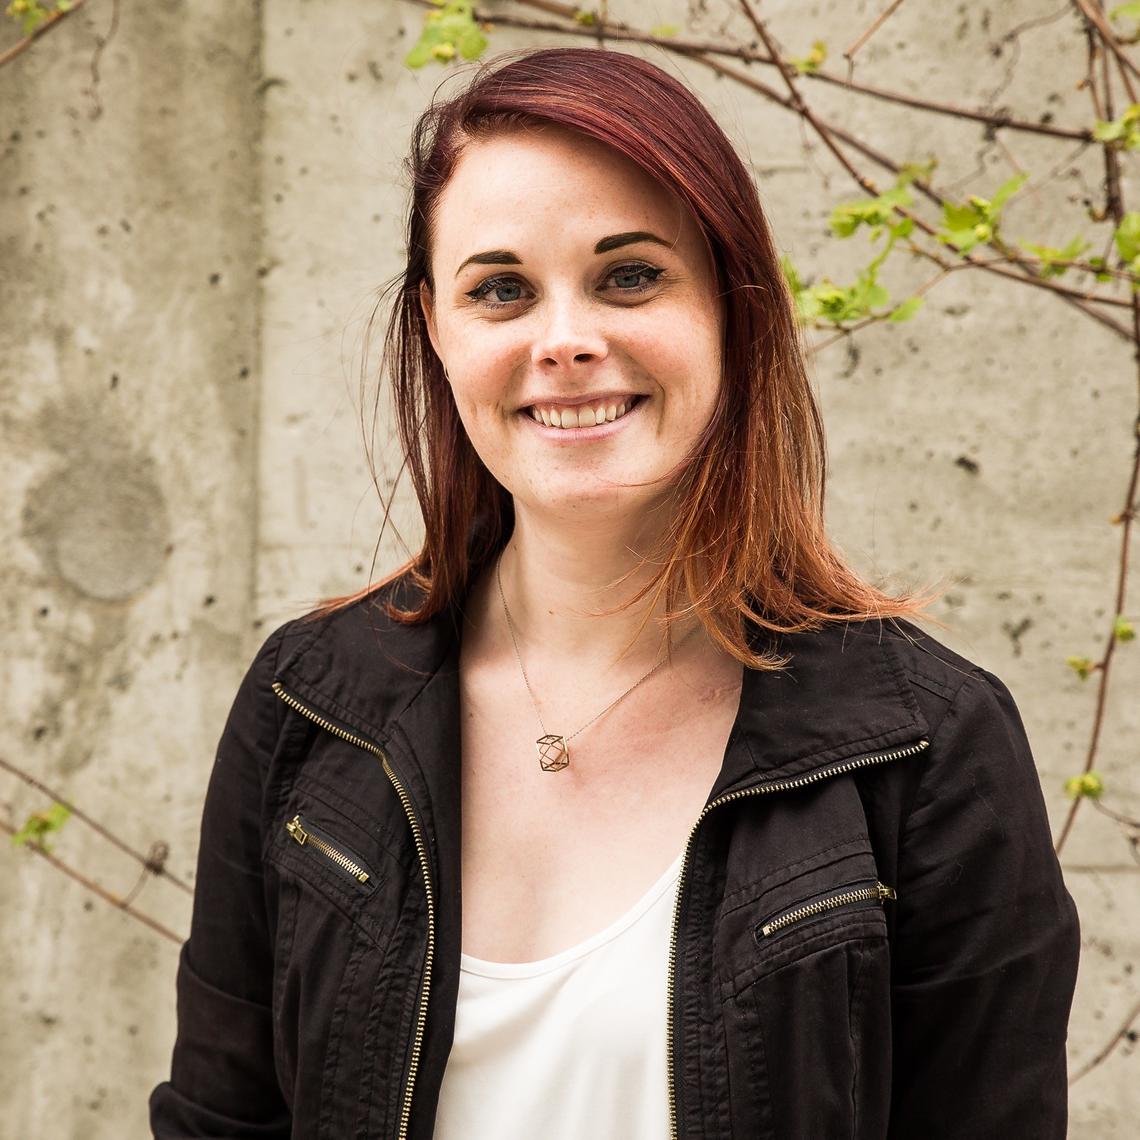 Kristine Vodon graduated with her Master’s of Environmental Design from the University of Calgary's School of Architecture, Planning and Landscape.